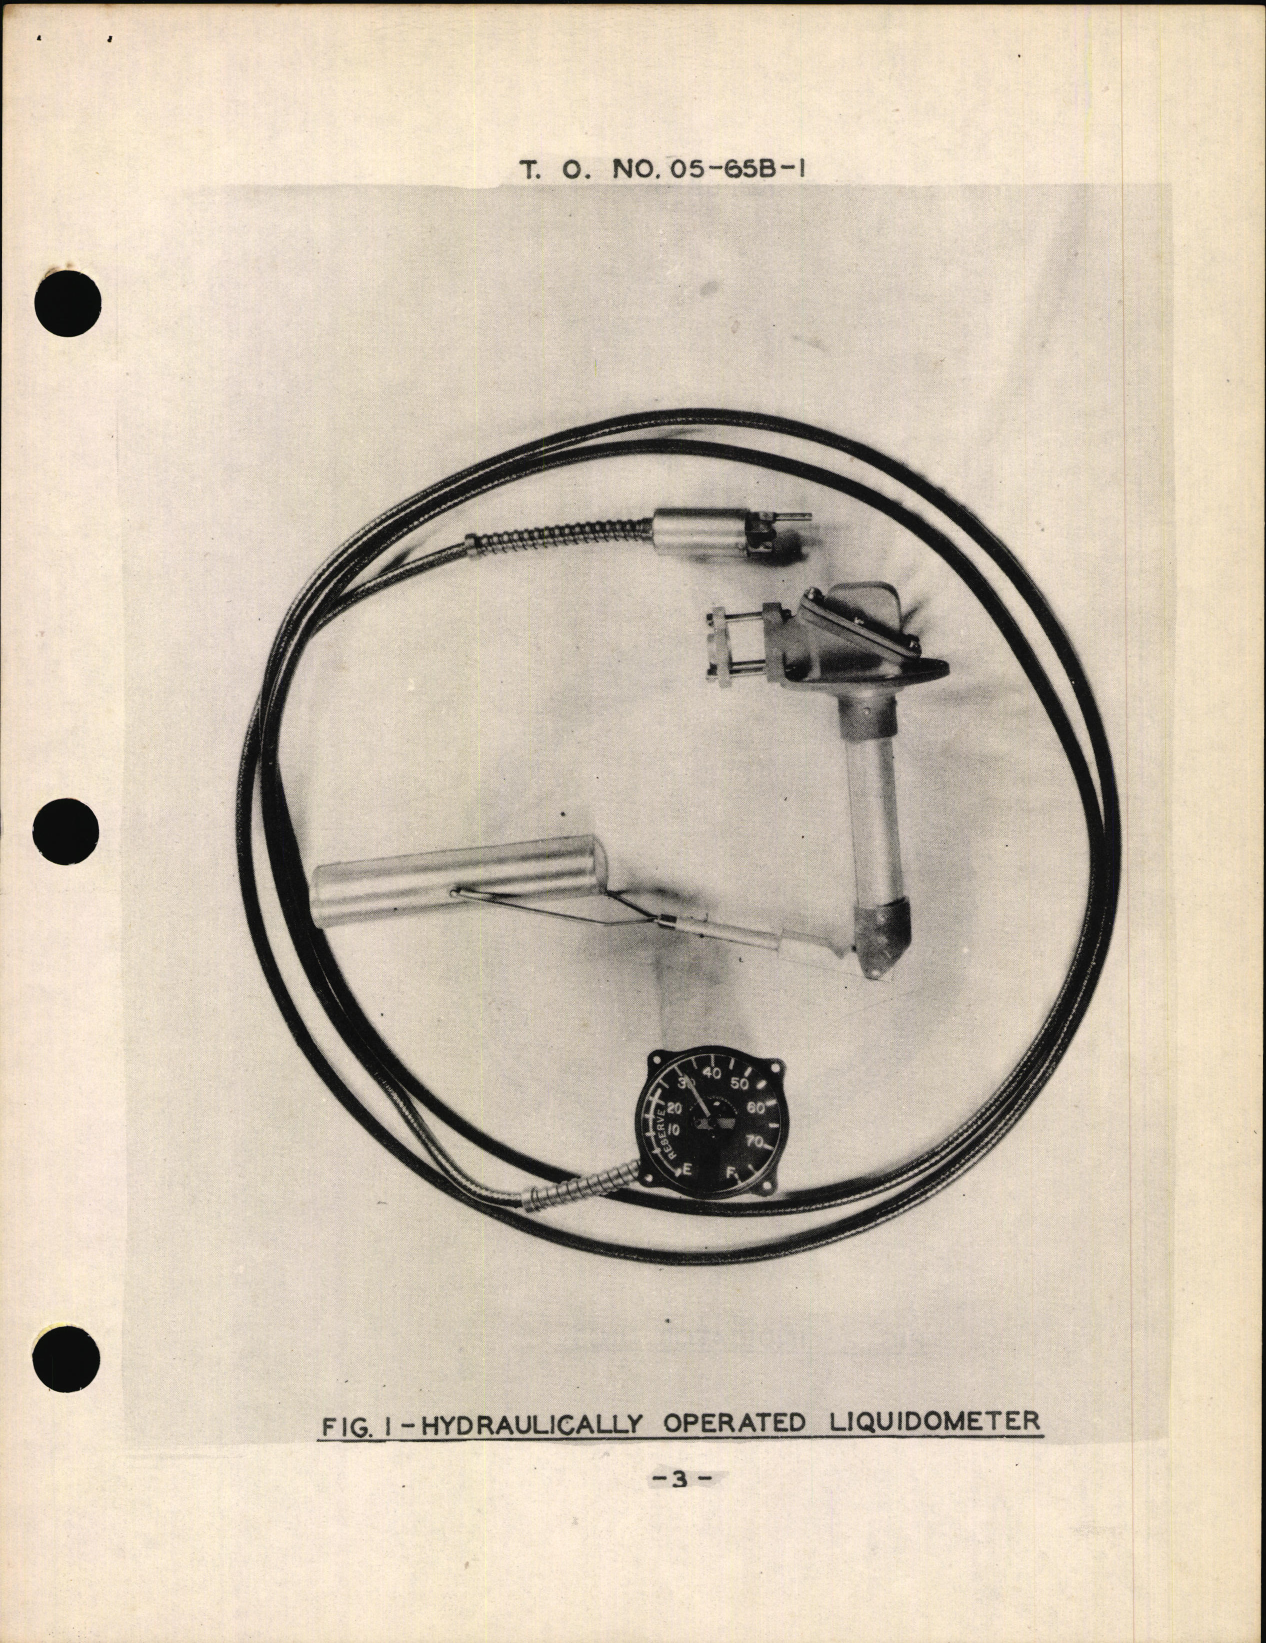 Sample page 5 from AirCorps Library document: Preliminary Handbook of Instructions with Parts Catalog for Hydraulically Operated Liquidometers